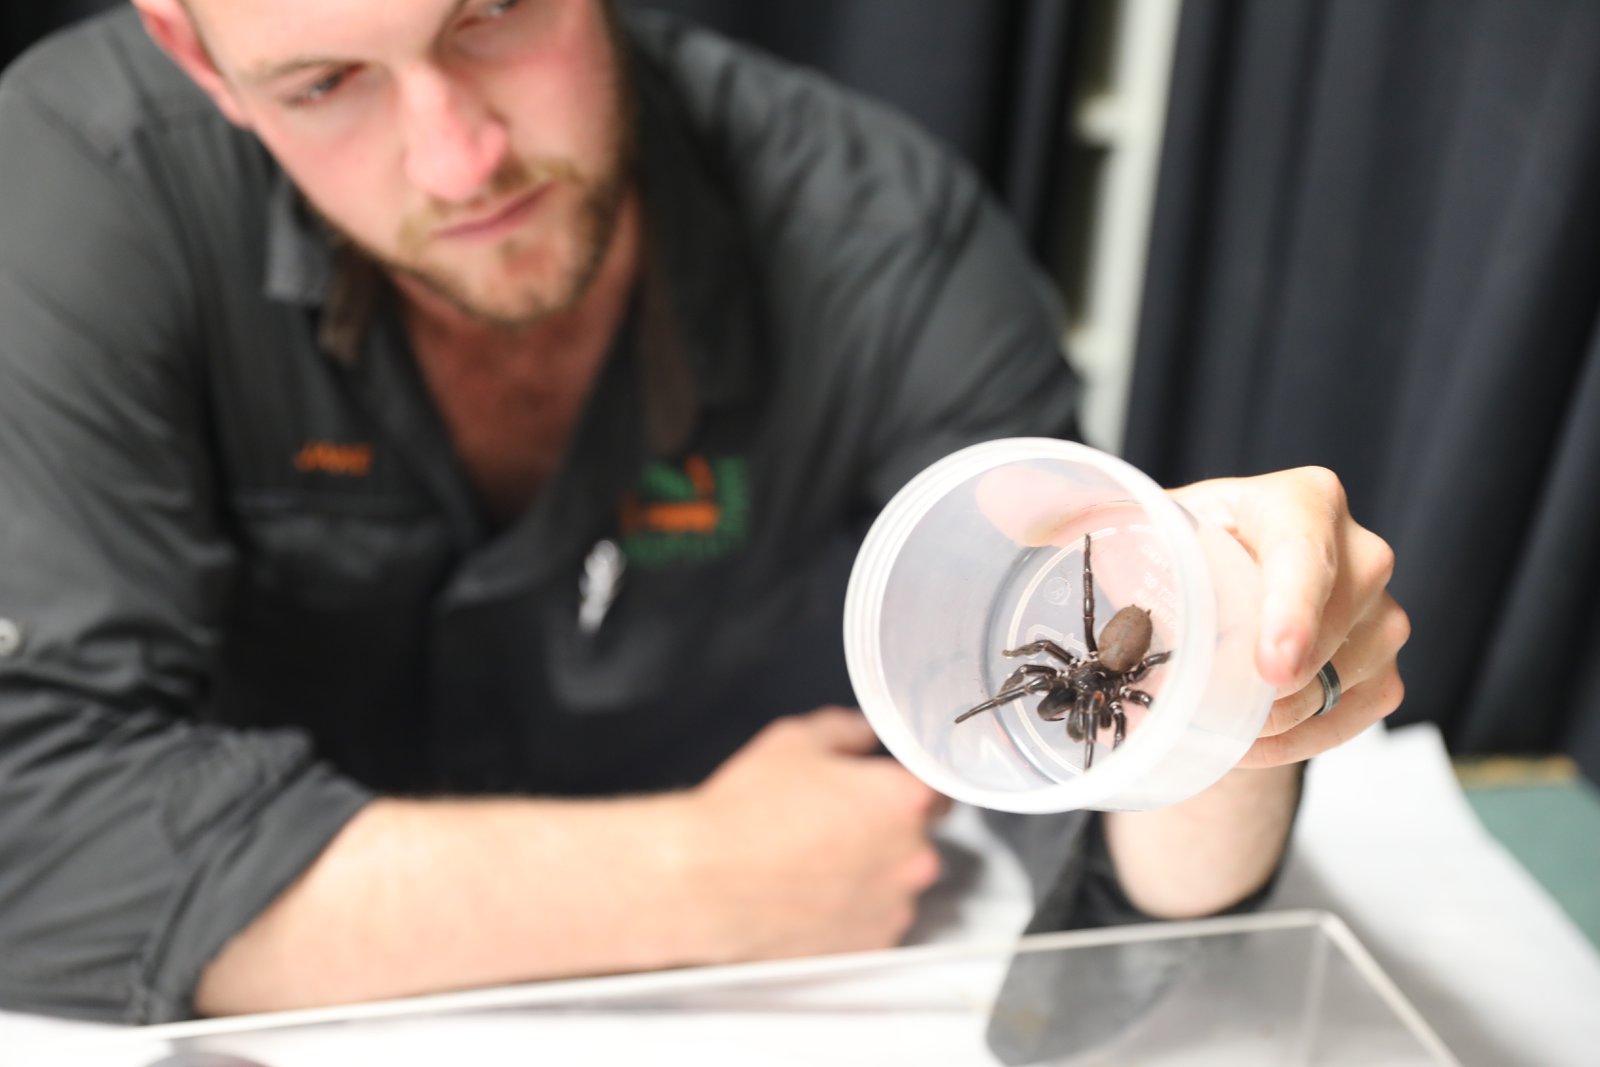 Non-Chemical Solutions For Funnel Web Spiders